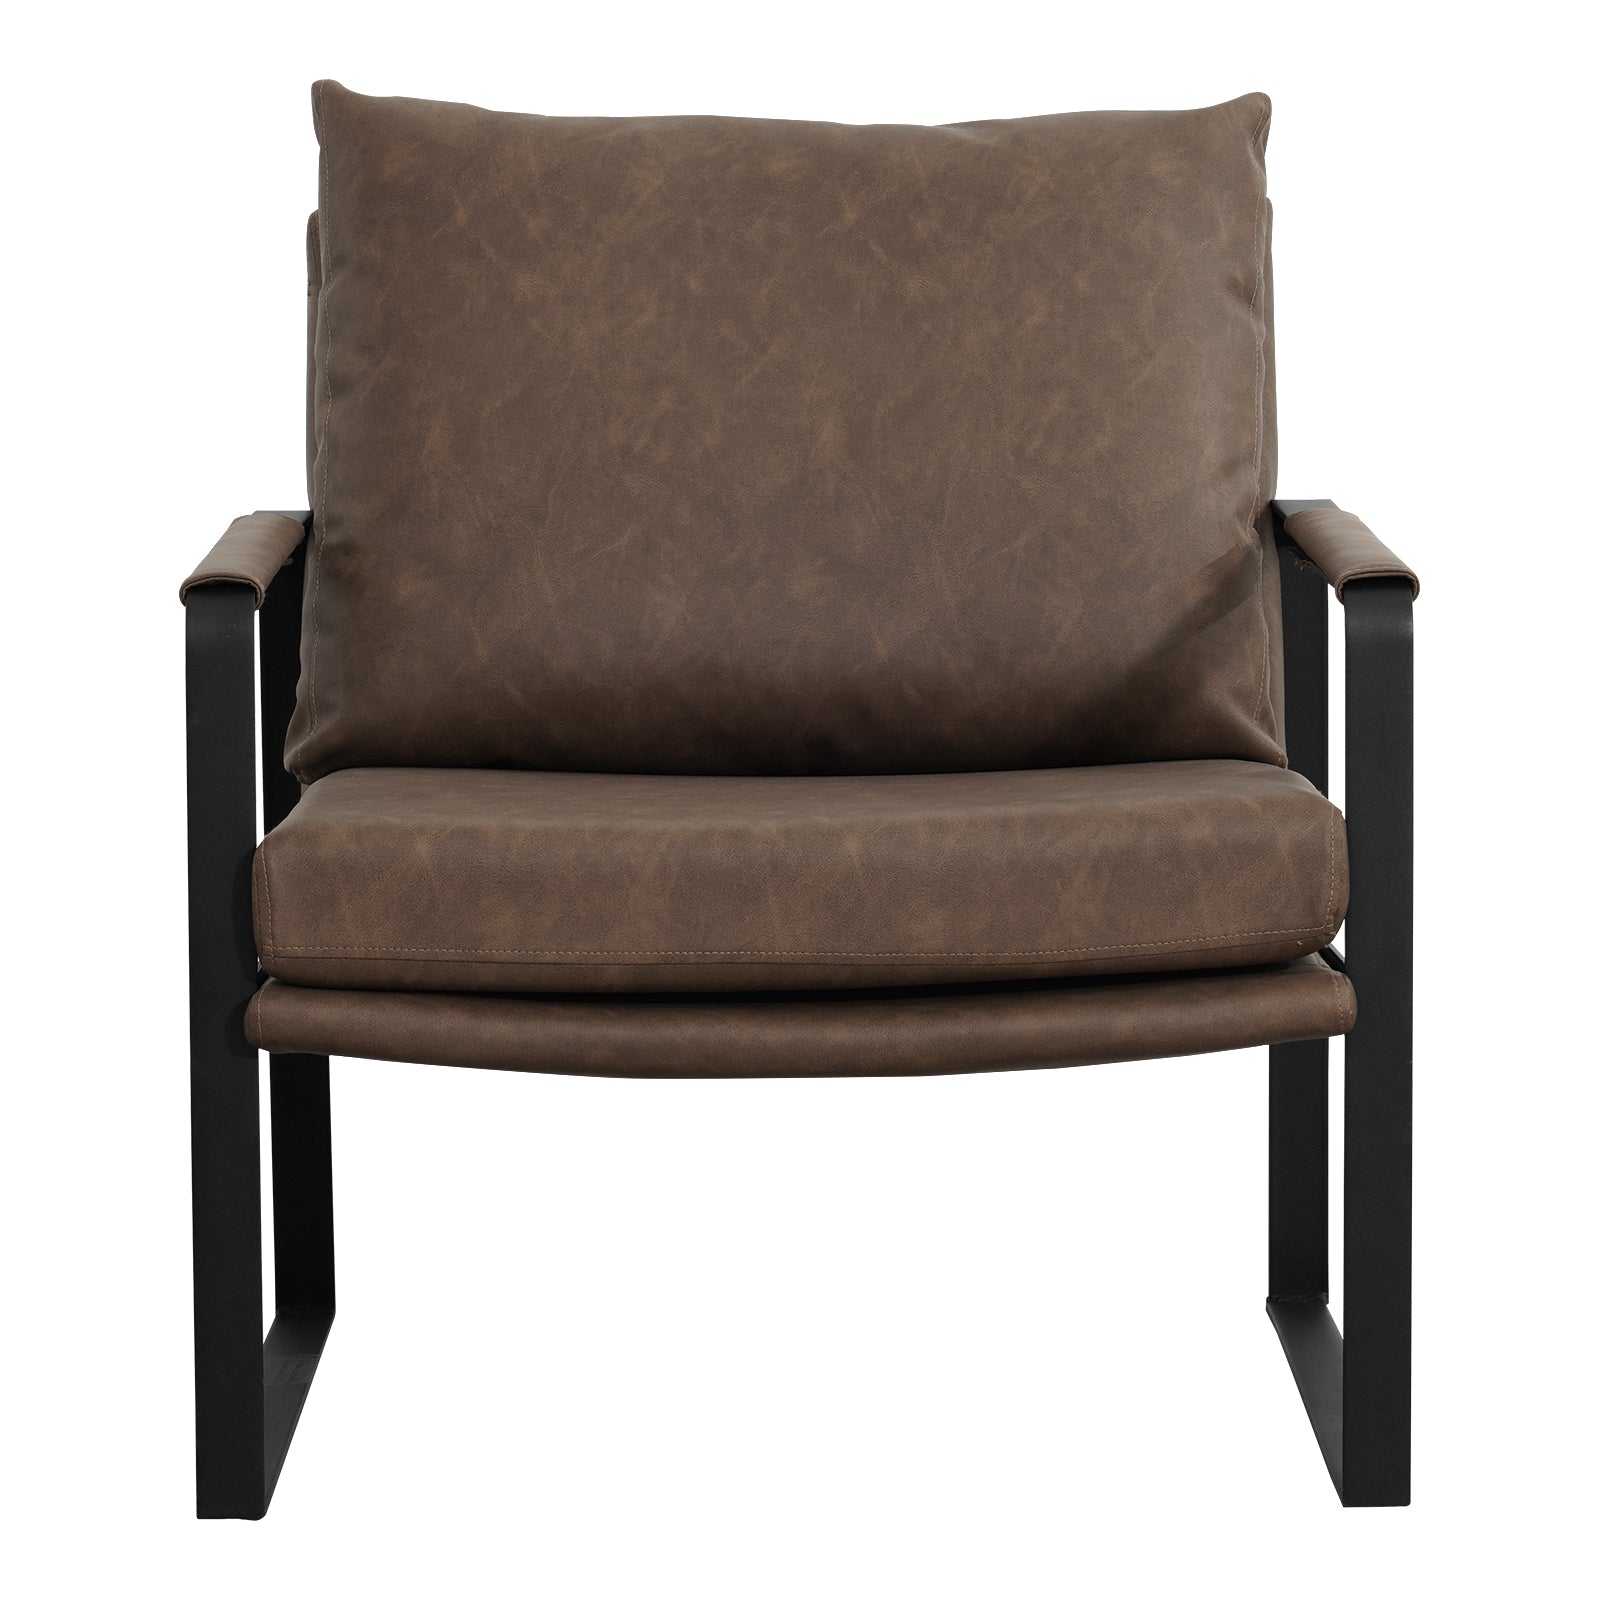 Mid-Century Modern Accent Chair with Comfortable Cushion